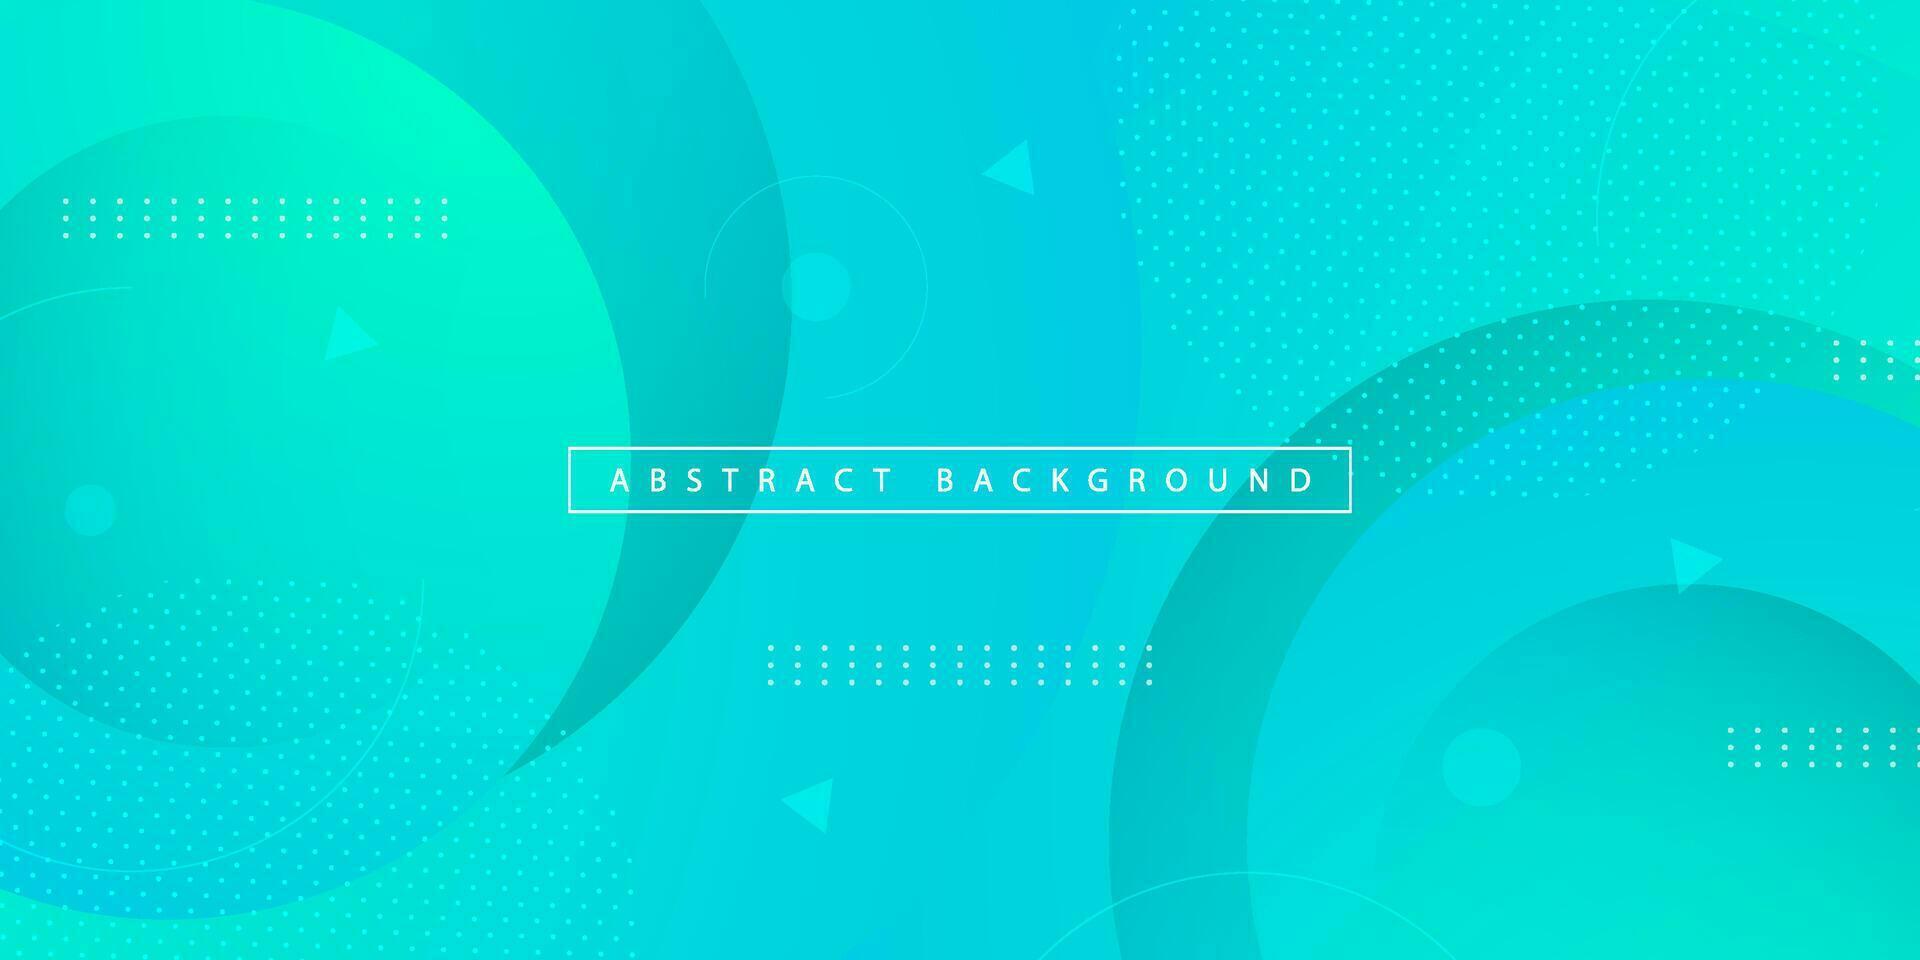 3D abstract bright blue green gradient illustration background with simple shape pattern. Cool design. Eps10 vector